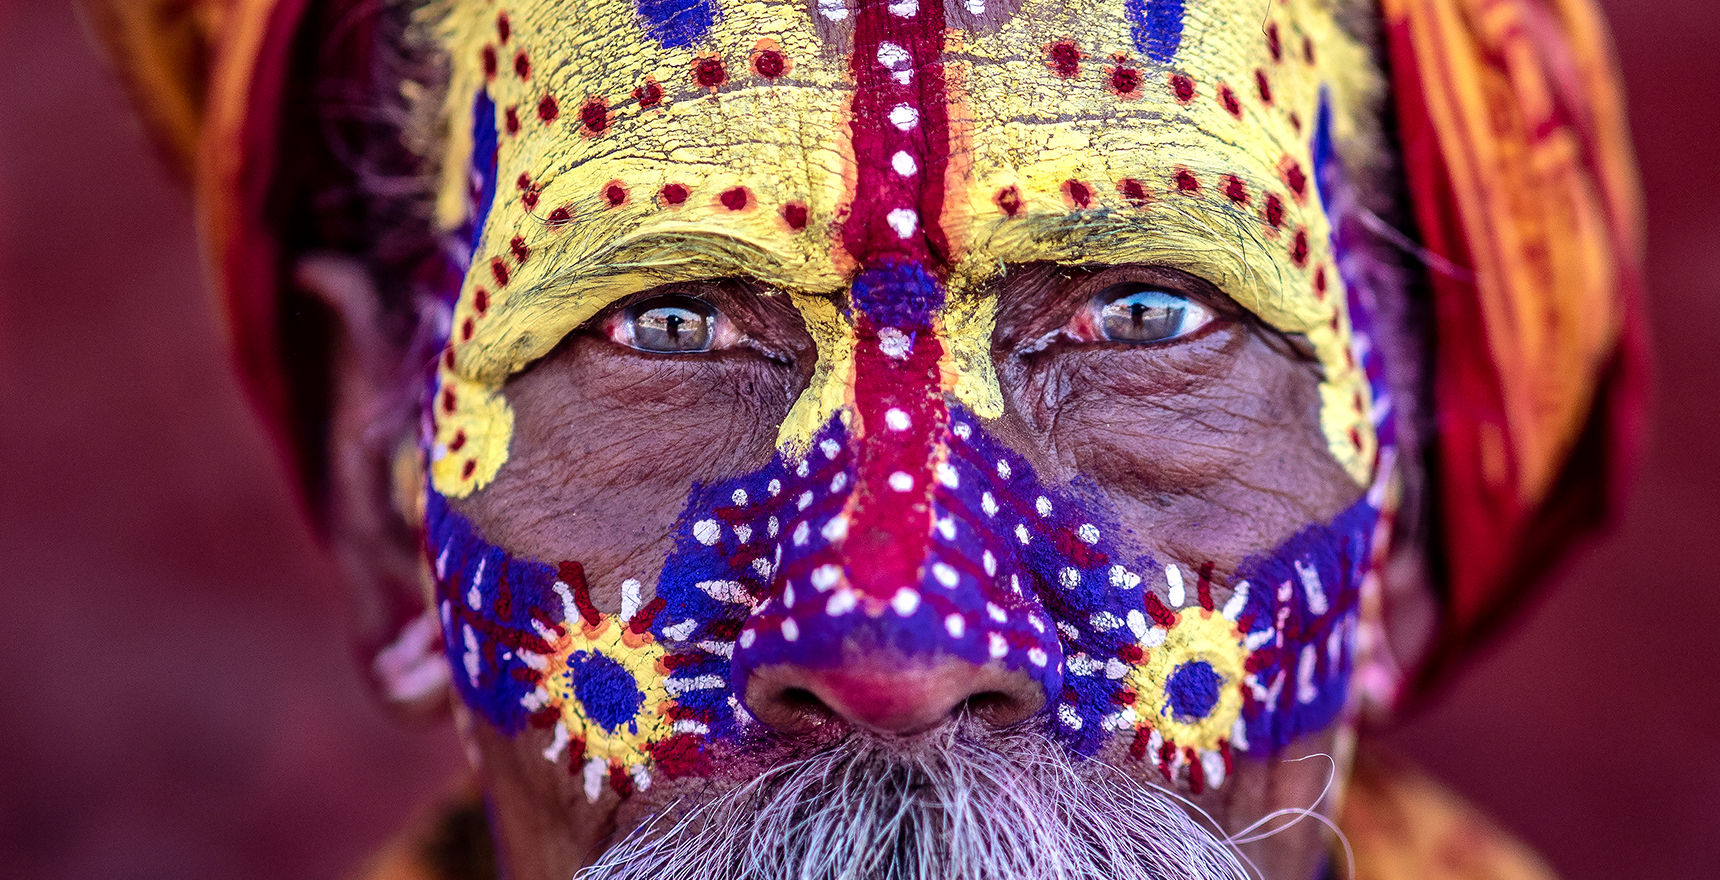 Close up photo of a man's face painted colorfully